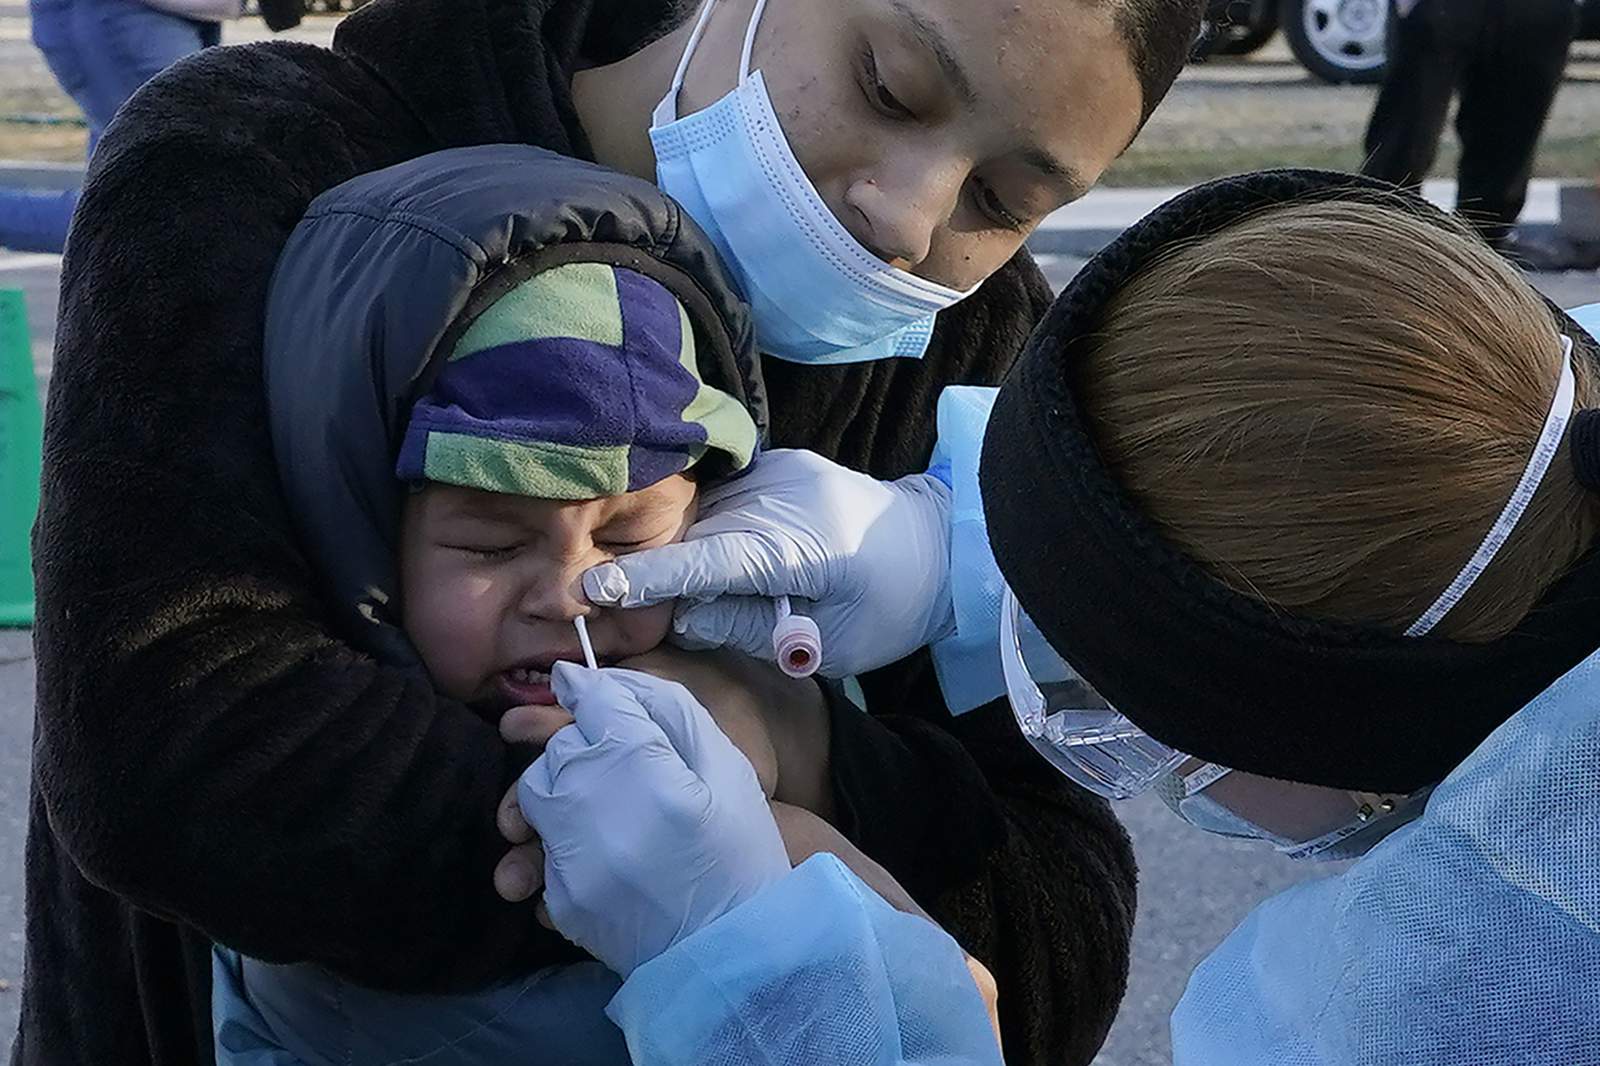 The Latest: Birx says Americans must be strict for pandemic